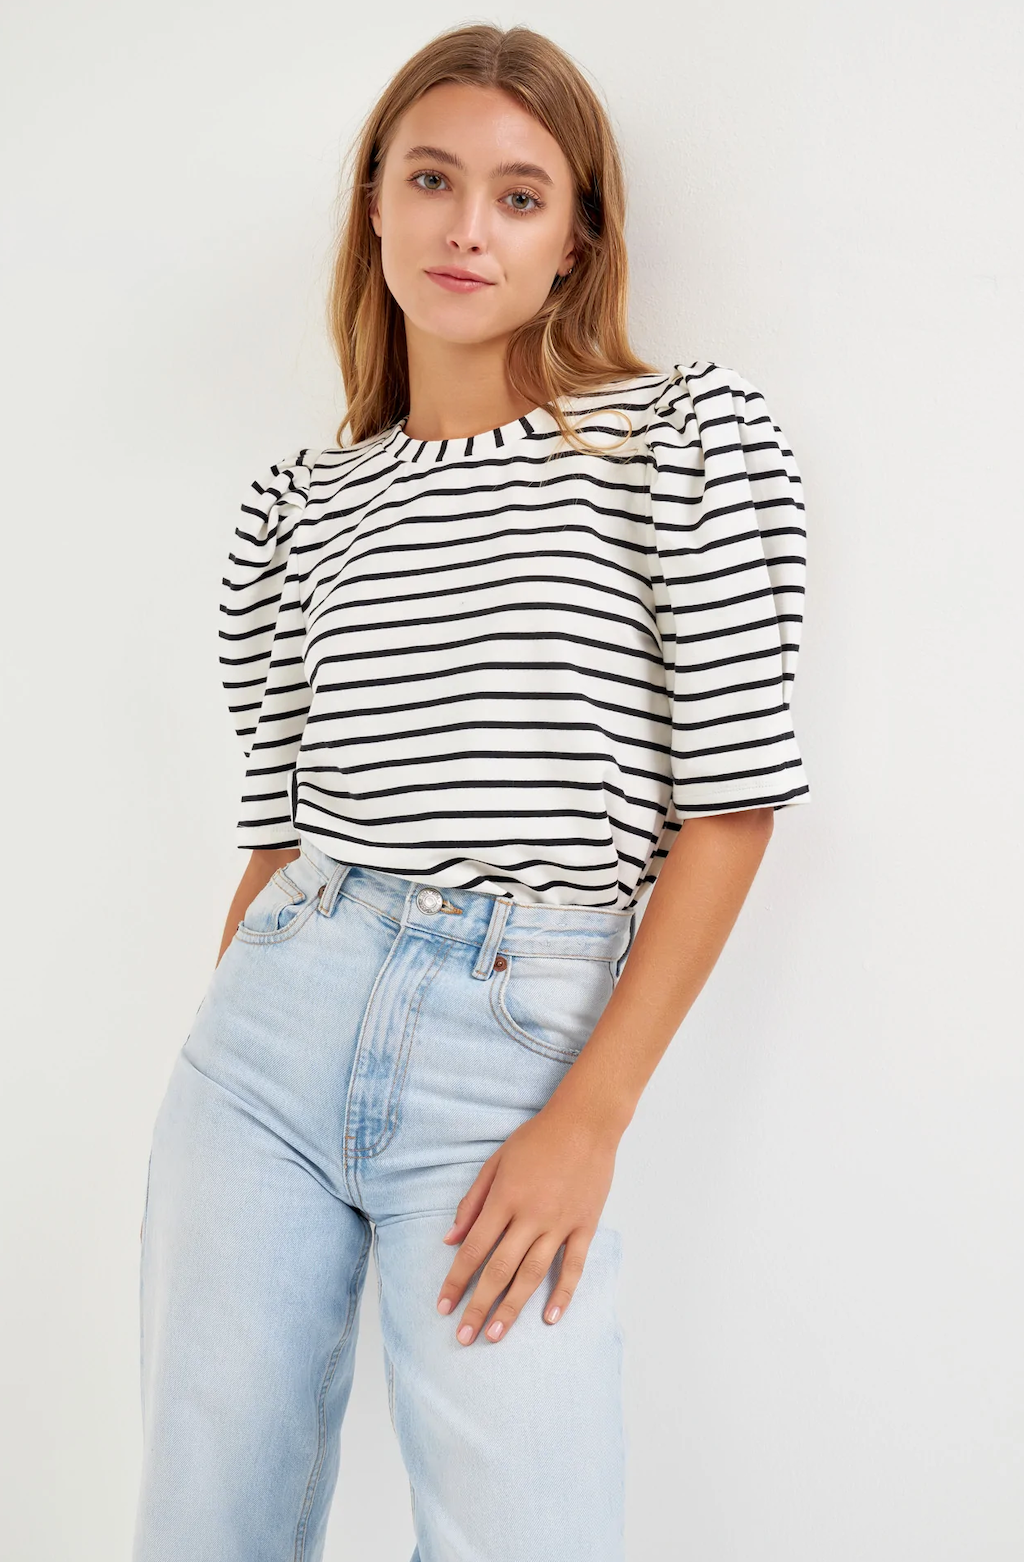 GOODWIN STRIPE TEE IN BLACK AND WHITE